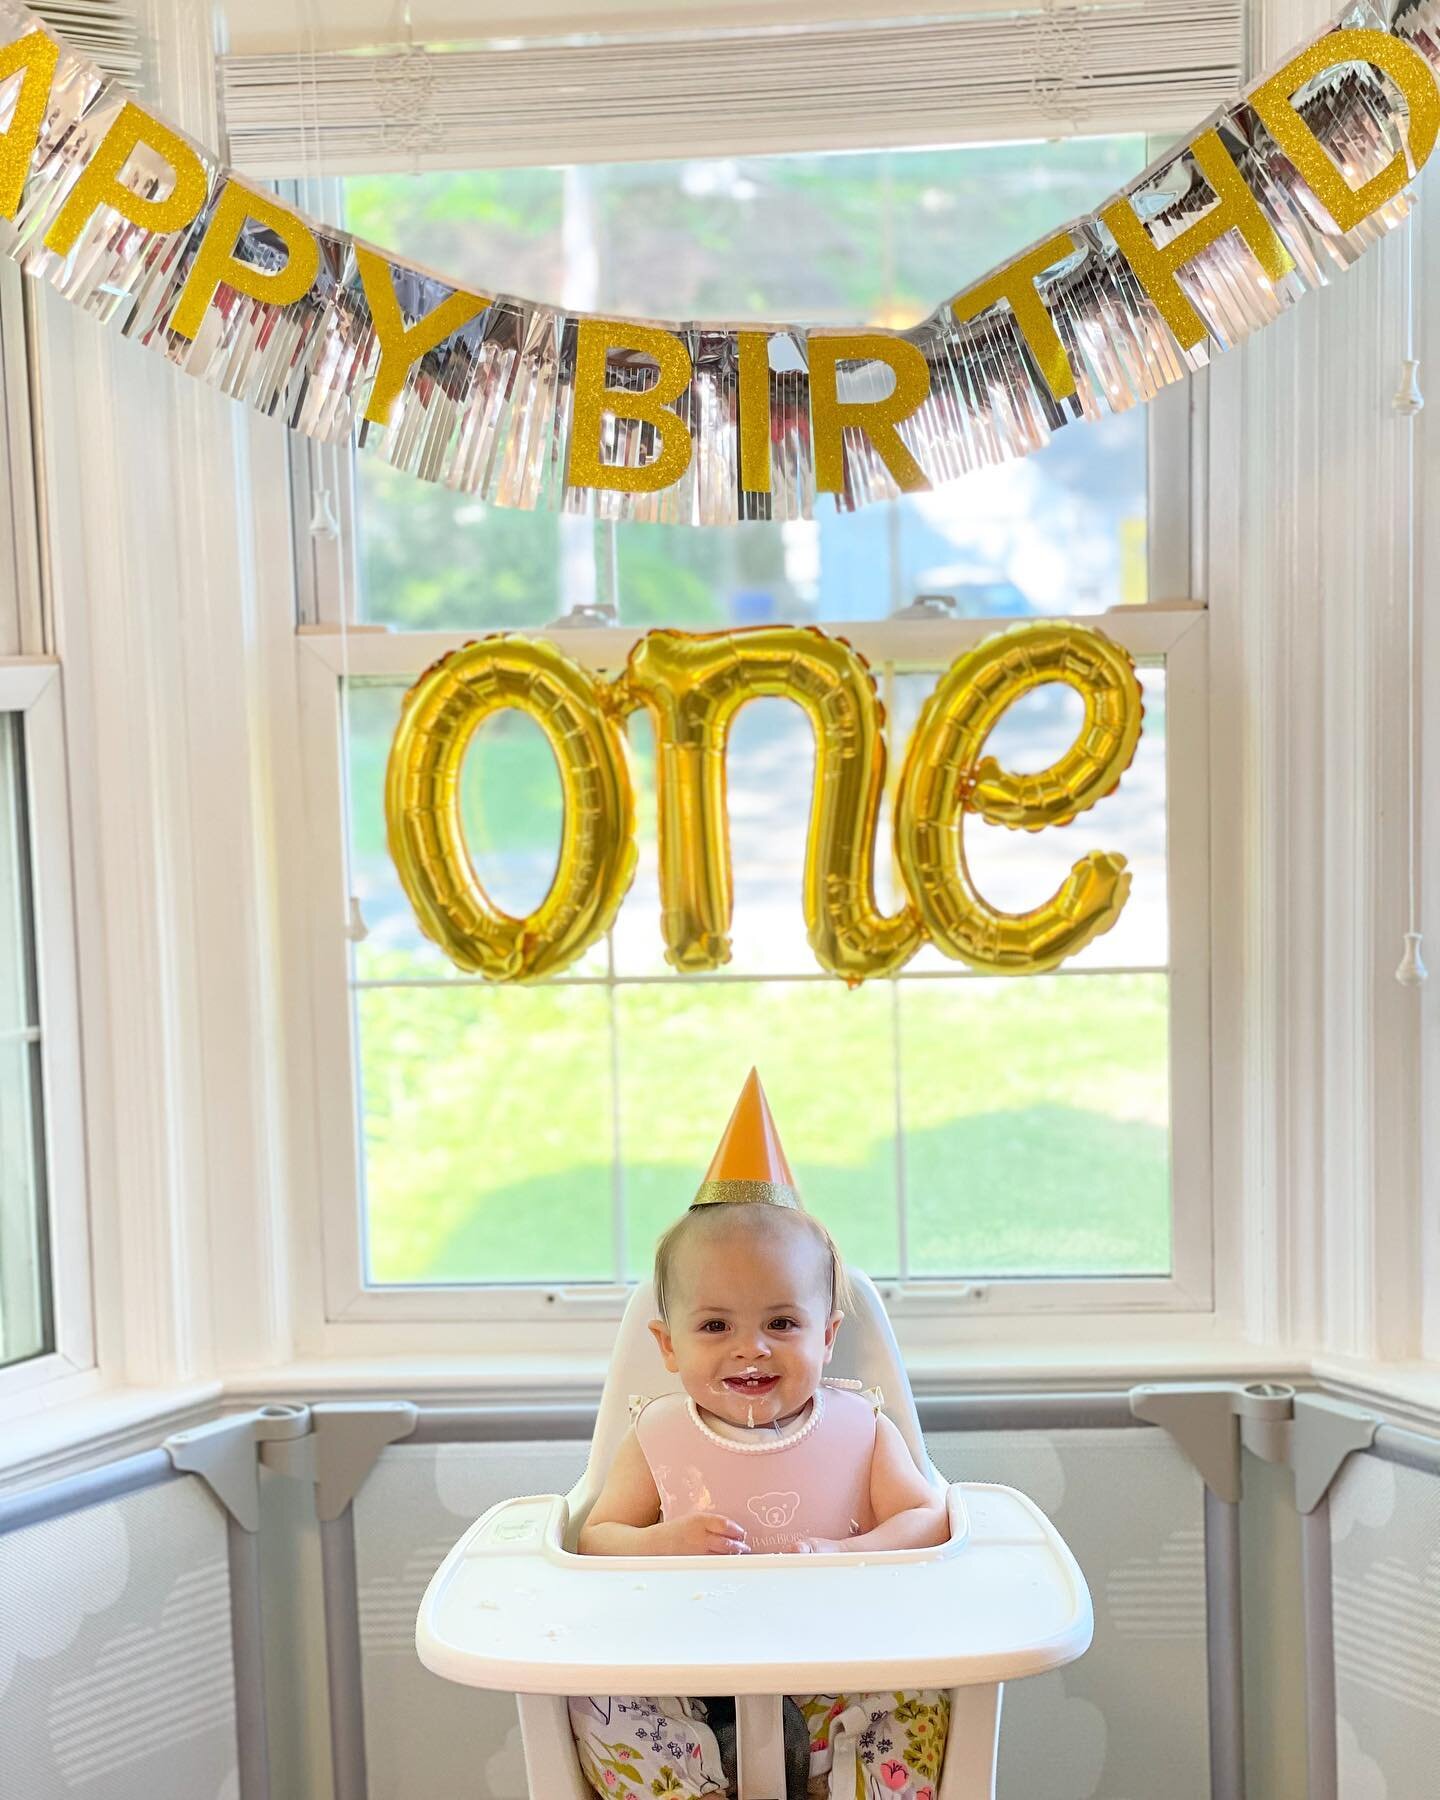 First Birthday in the books!
-
Yesterday Kennedy turned one! Having just moved a few days ago, we opted not to have a party (the logistics were impossible), but that doesn&rsquo;t mean we didn&rsquo;t celebrate!
-
We had a wonderful day together as a